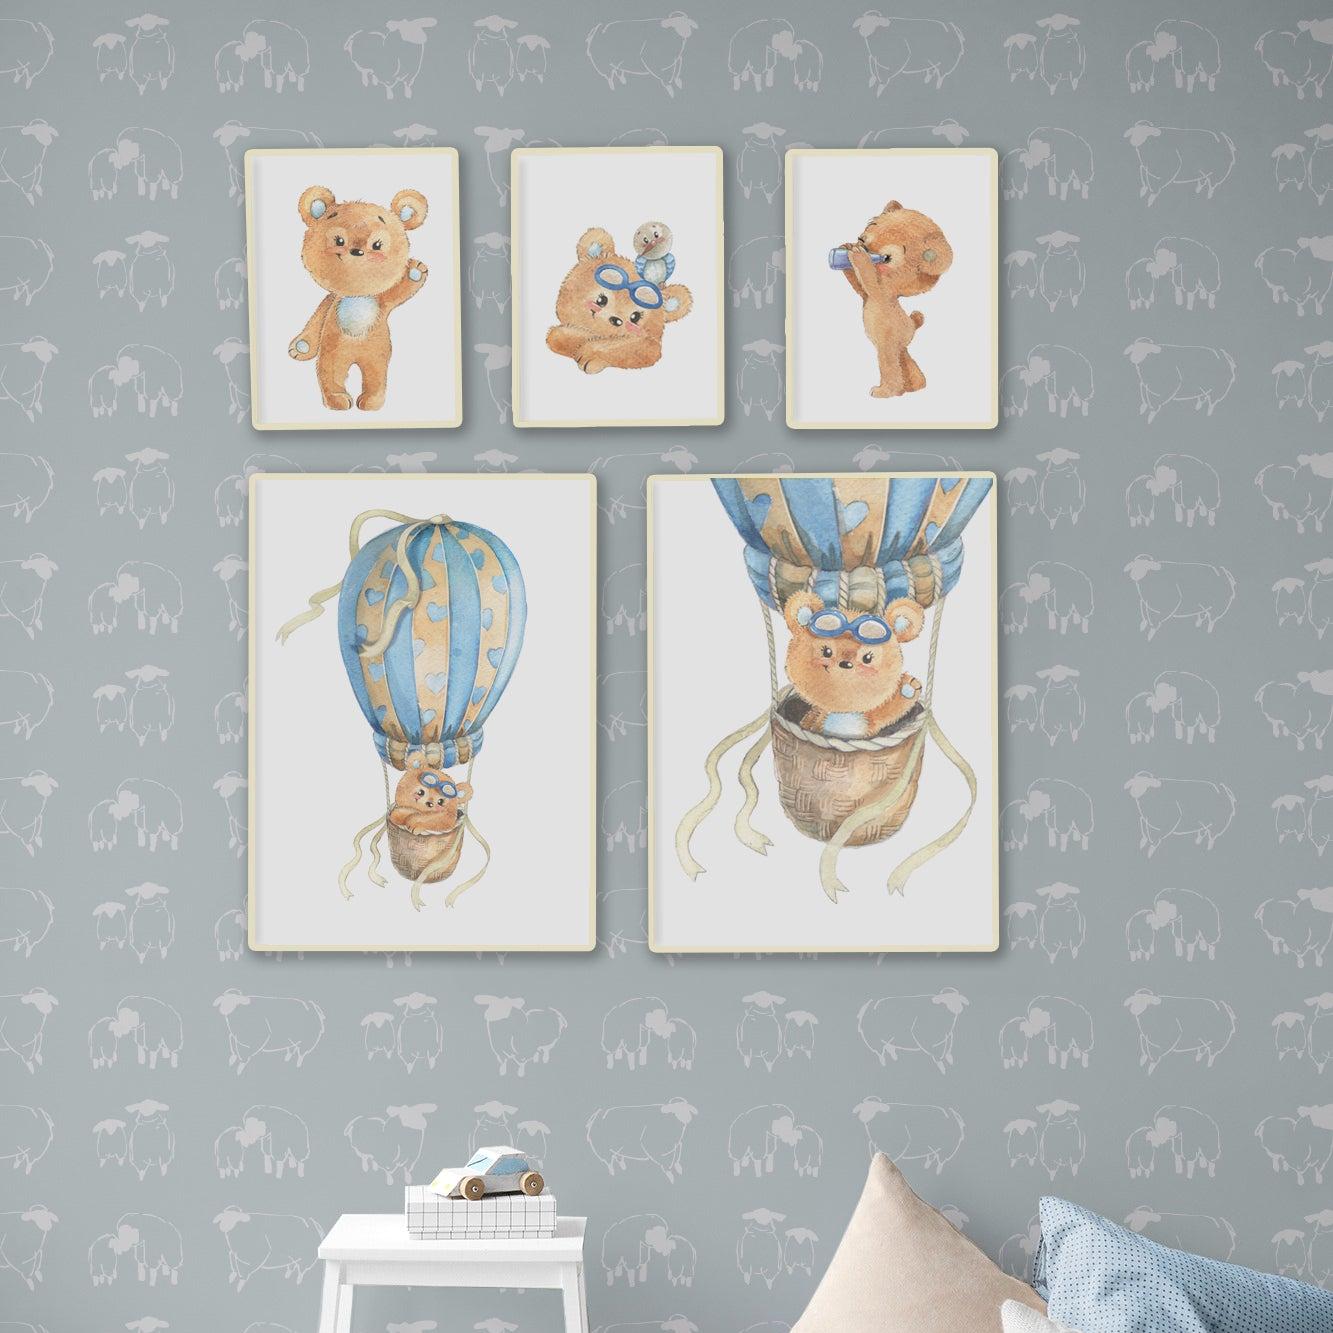 Baba (Blue) Wallpaper by The Ania Zwara Line featured in stylish children's room, emphasizing playful design.
